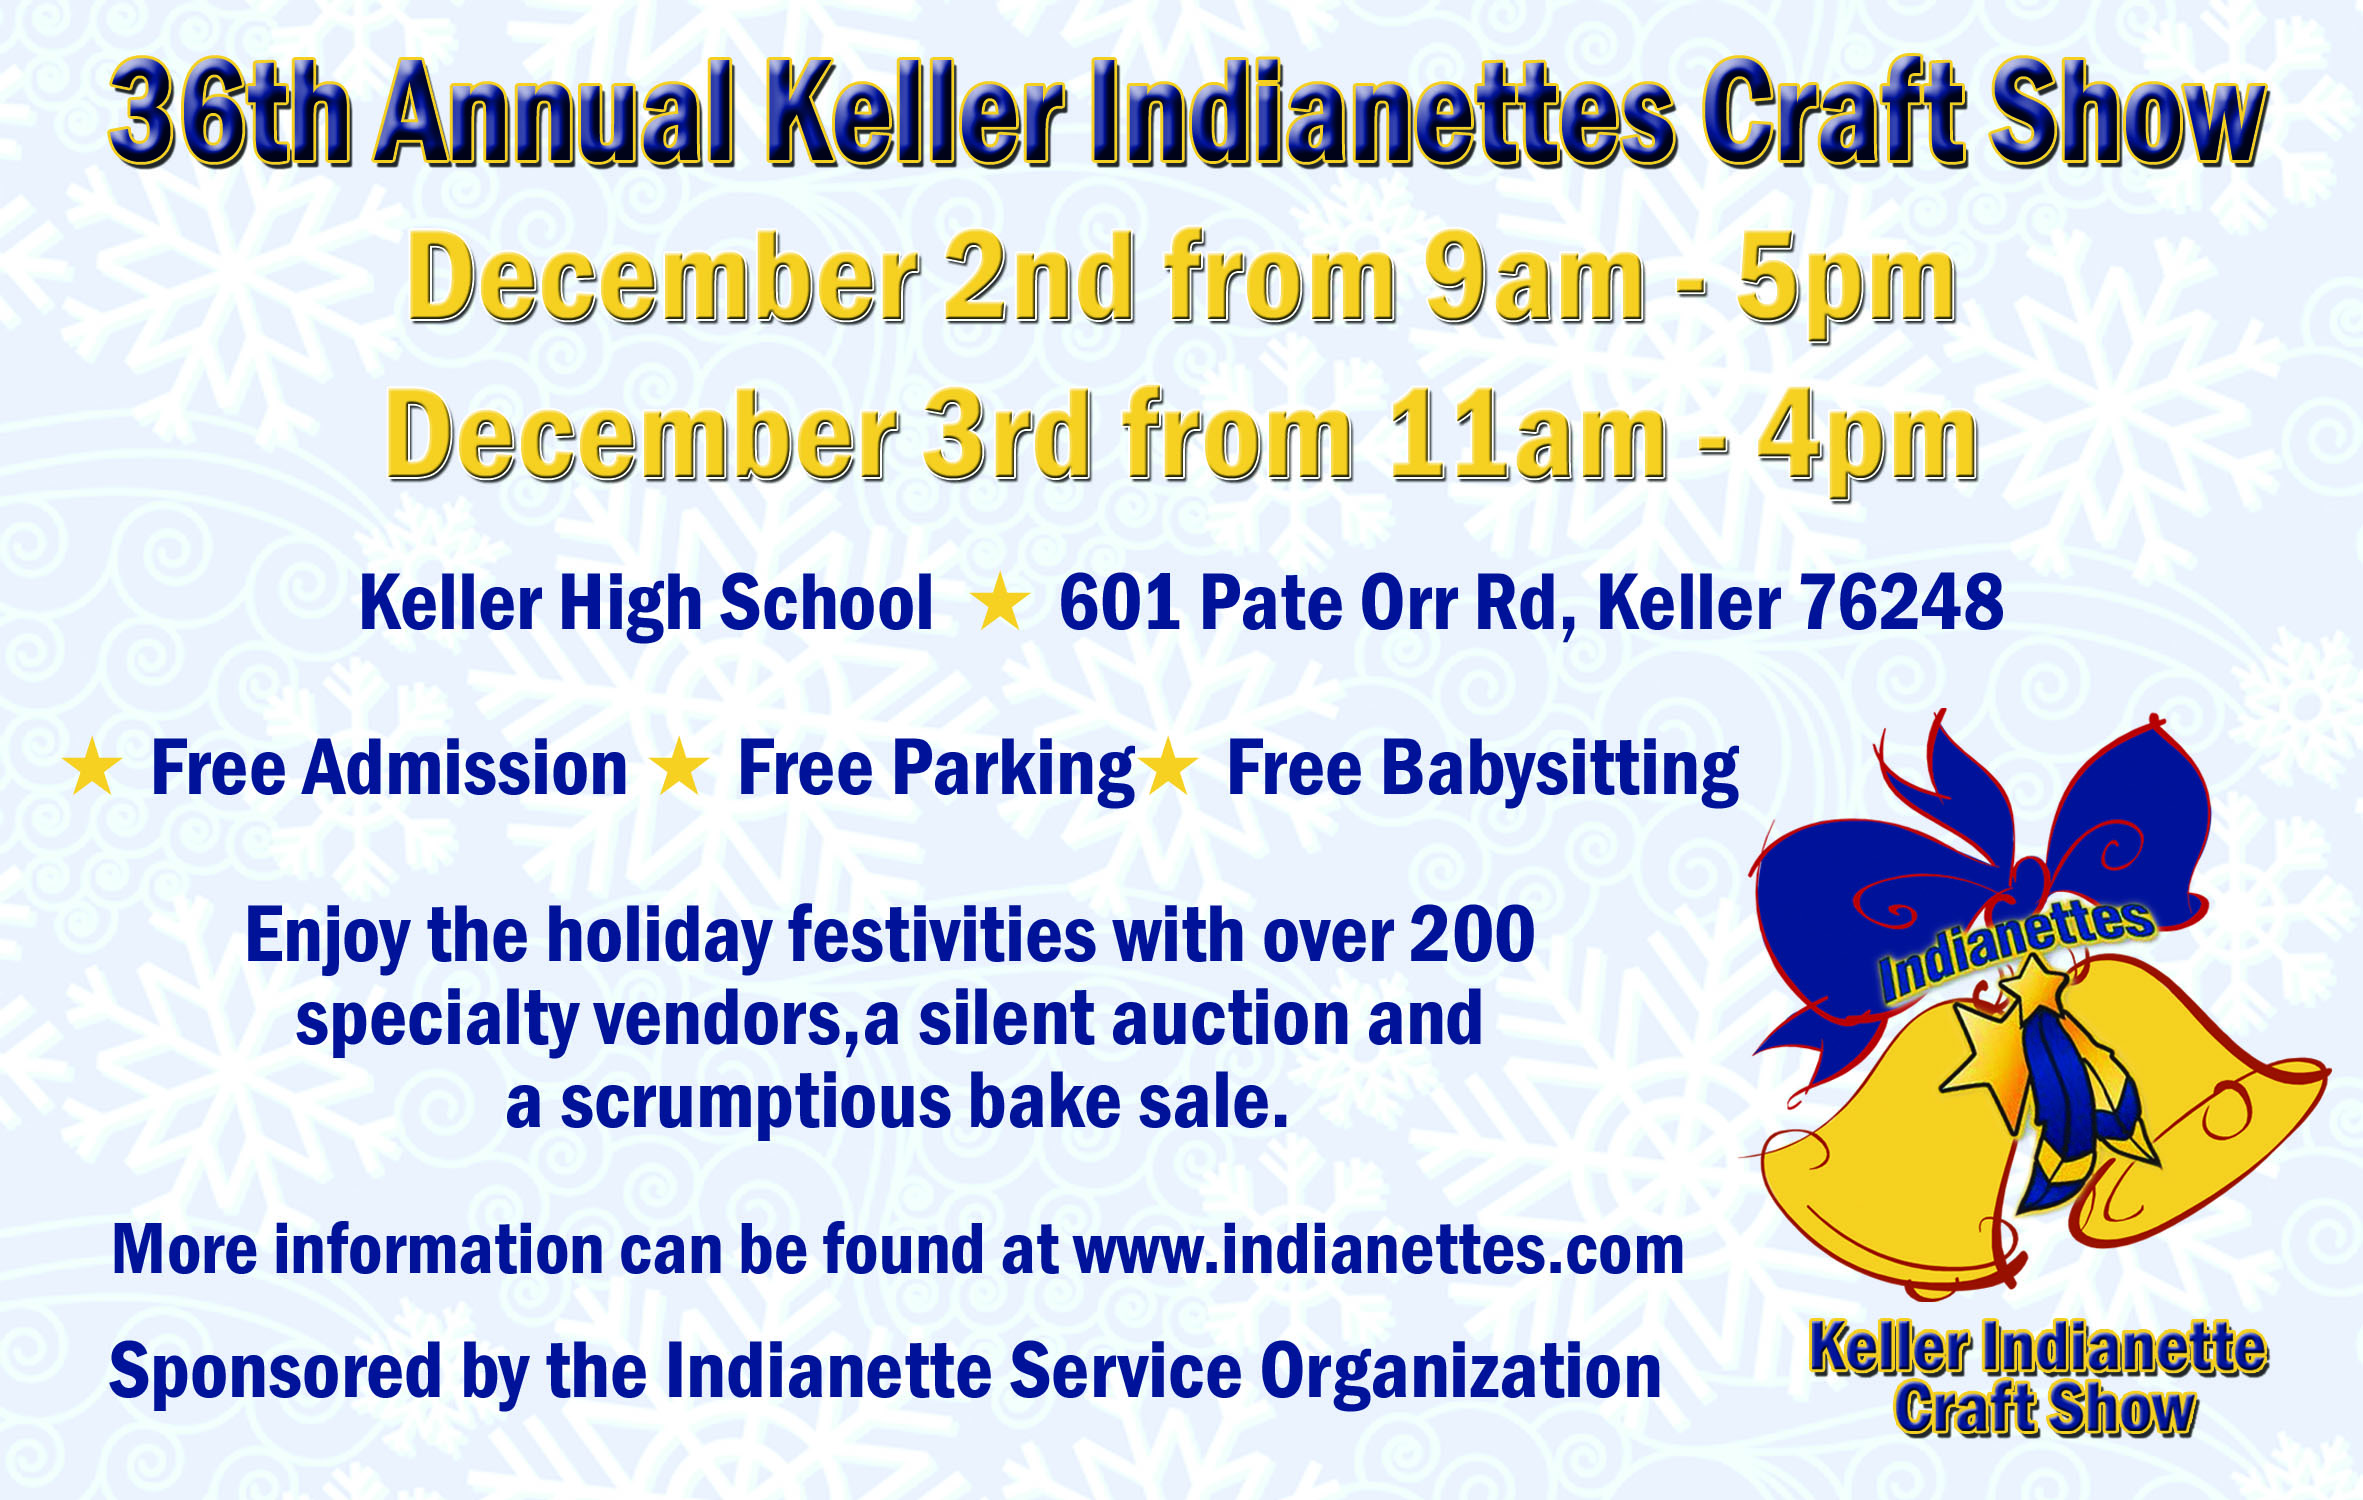 36th Annual Keller Indianettes Craft Show